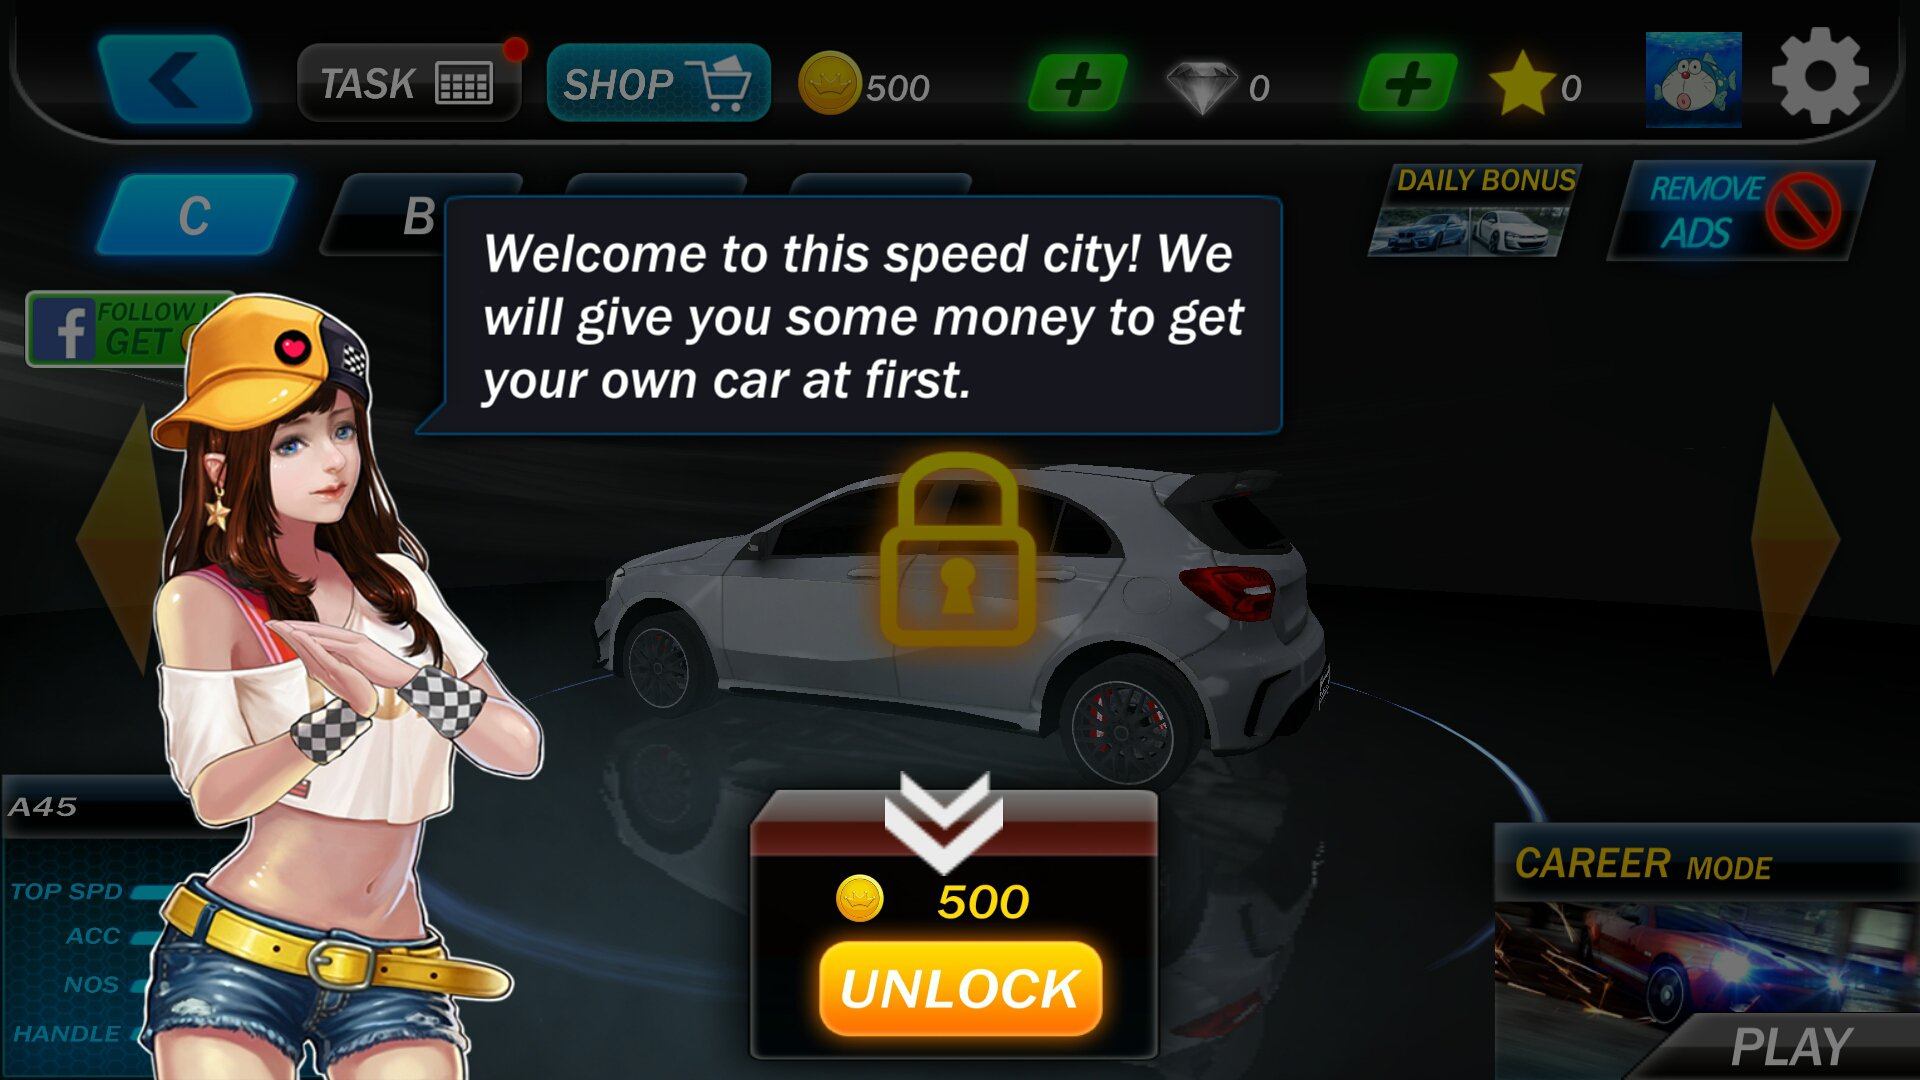 See How To Get Diamonds In Street Racing 3D